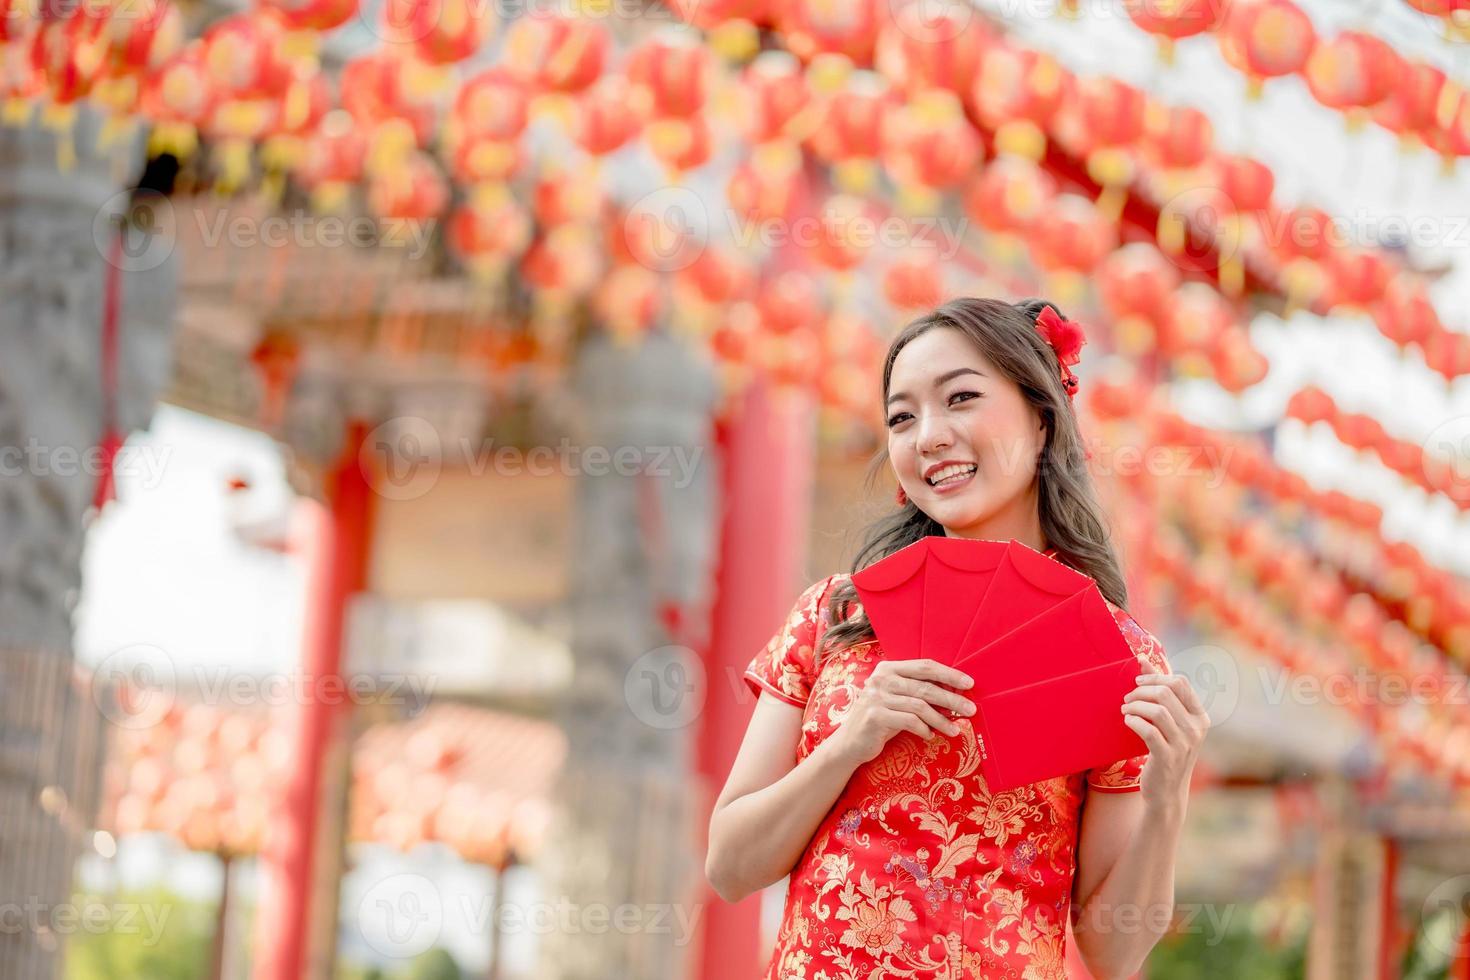 Beautiful asian woman smiling happily holding ang pao, red envelopes wearing cheongsam looking confident in Chinese Buddhist temple. Celebrate Chinese lunar new year, festive season holiday photo